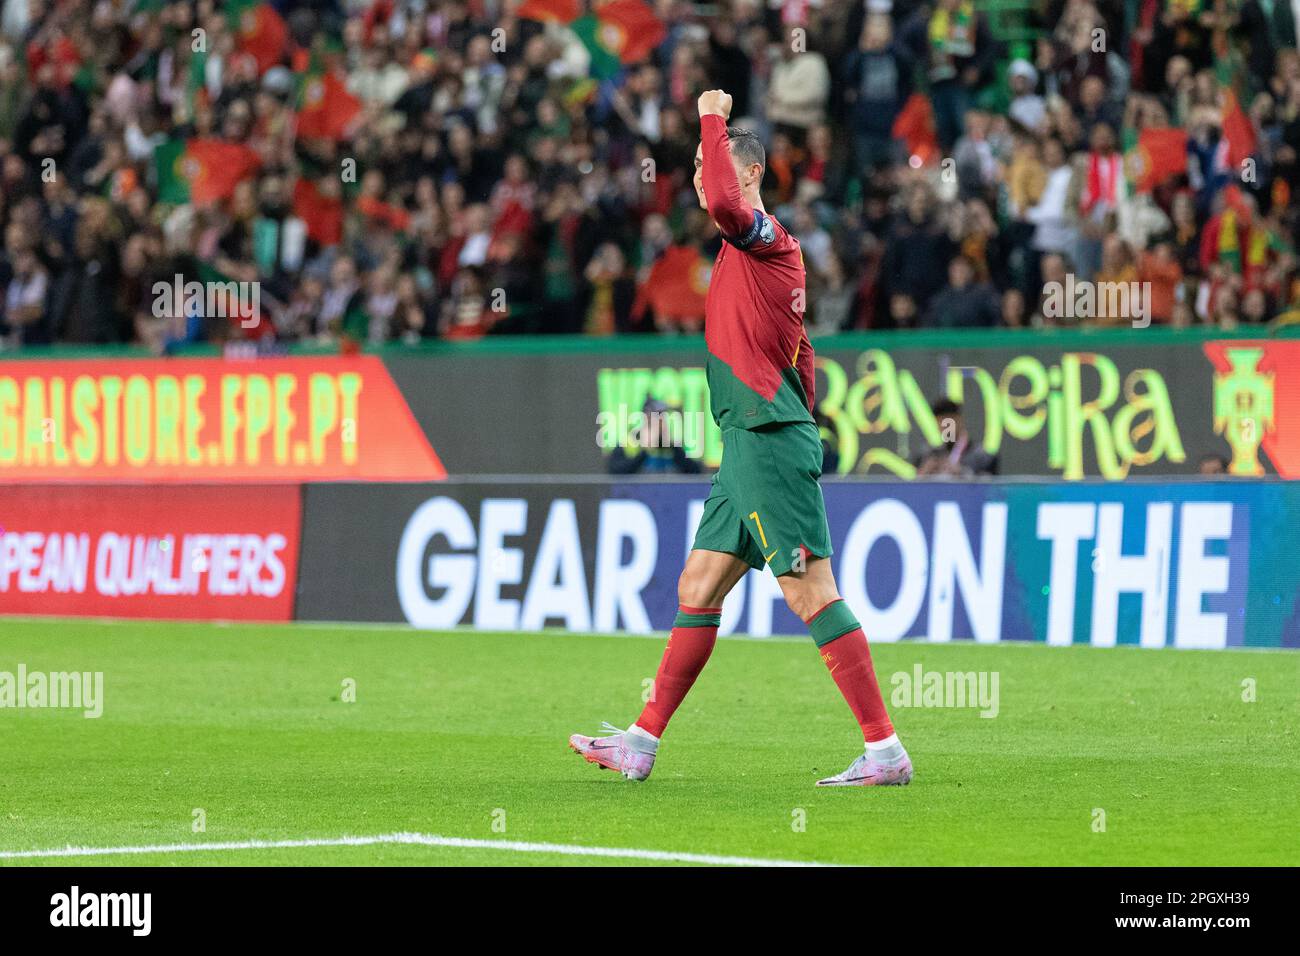 Lisbon, Portugal. 23rd Mar, 2023. March 23, 2023. Lisbon, Portugal. PortugalÕs and Al Nassr forward Cristiano Ronaldo (7) celebrating after scoring a goal during the 1st Round of Group J for the Euro 2024 Qualifying Round, Portugal vs Liechtenstein Credit: Alexandre de Sousa/Alamy Live News Stock Photo